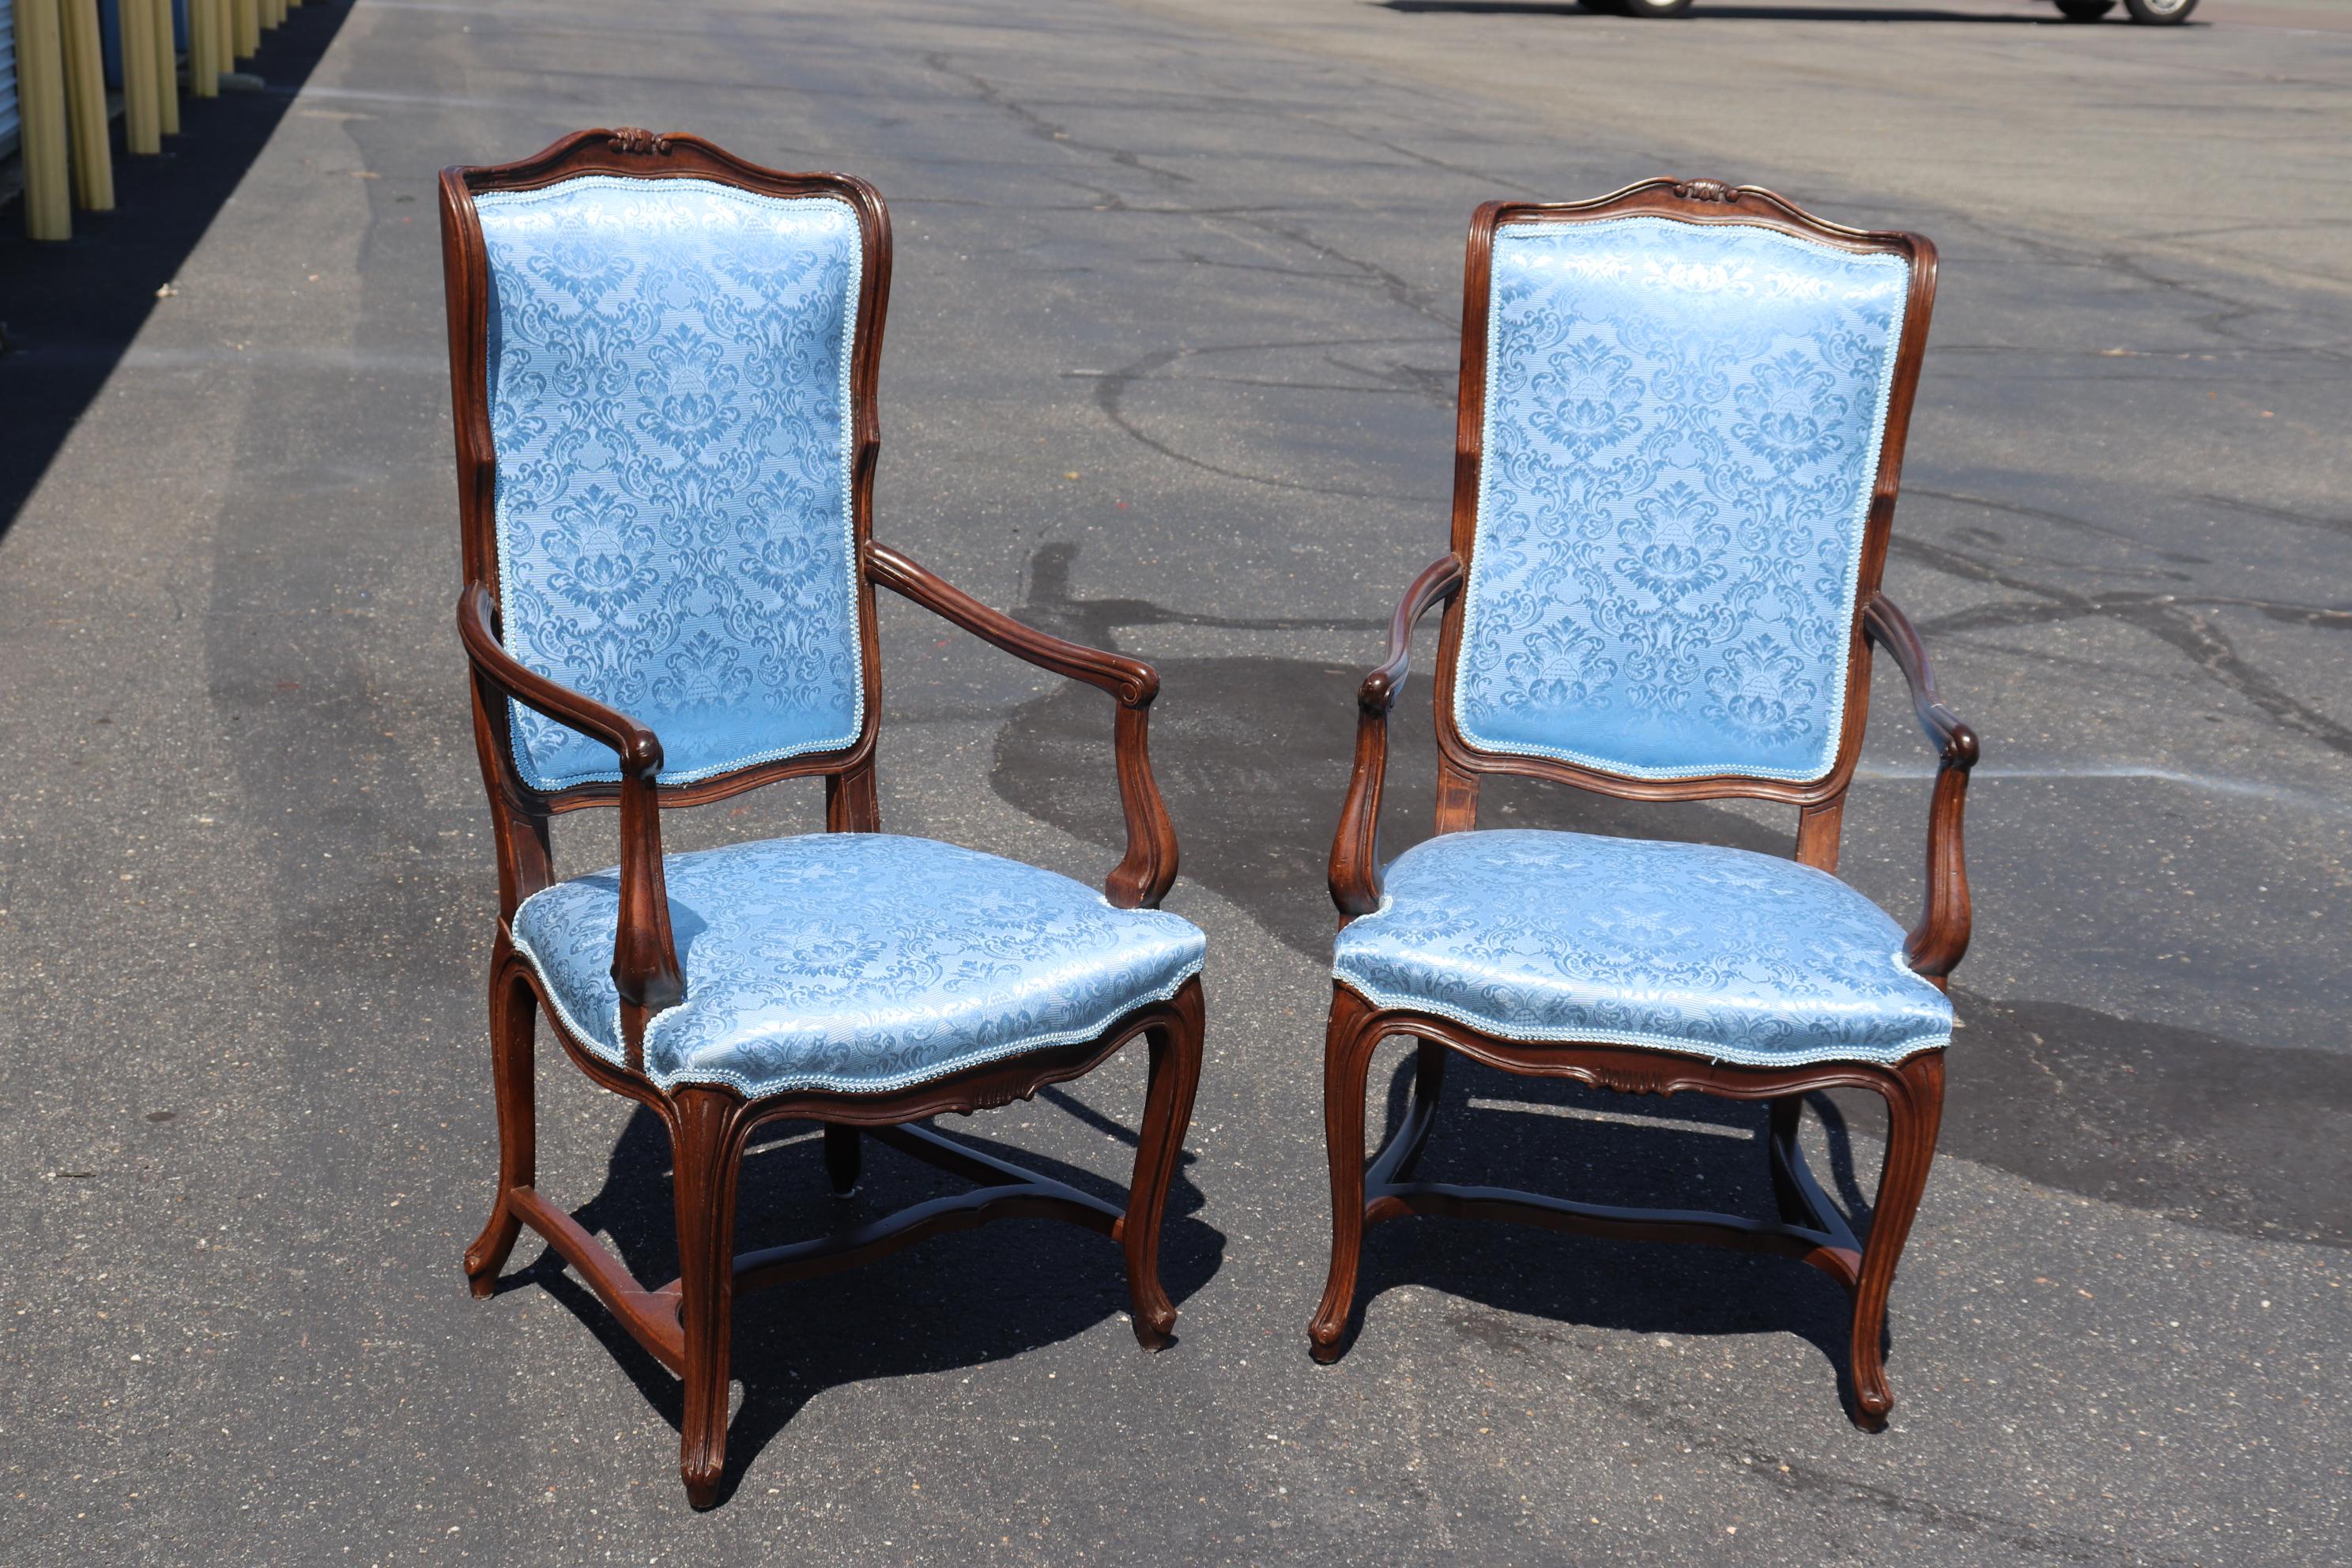 This is a beautifully upholstered pair of chairs that are perfect for the head of a dining table or in a living room as accent chairs. The chairs measure 45 tall x 26 deep x 23 wide x 18 inch seat height.